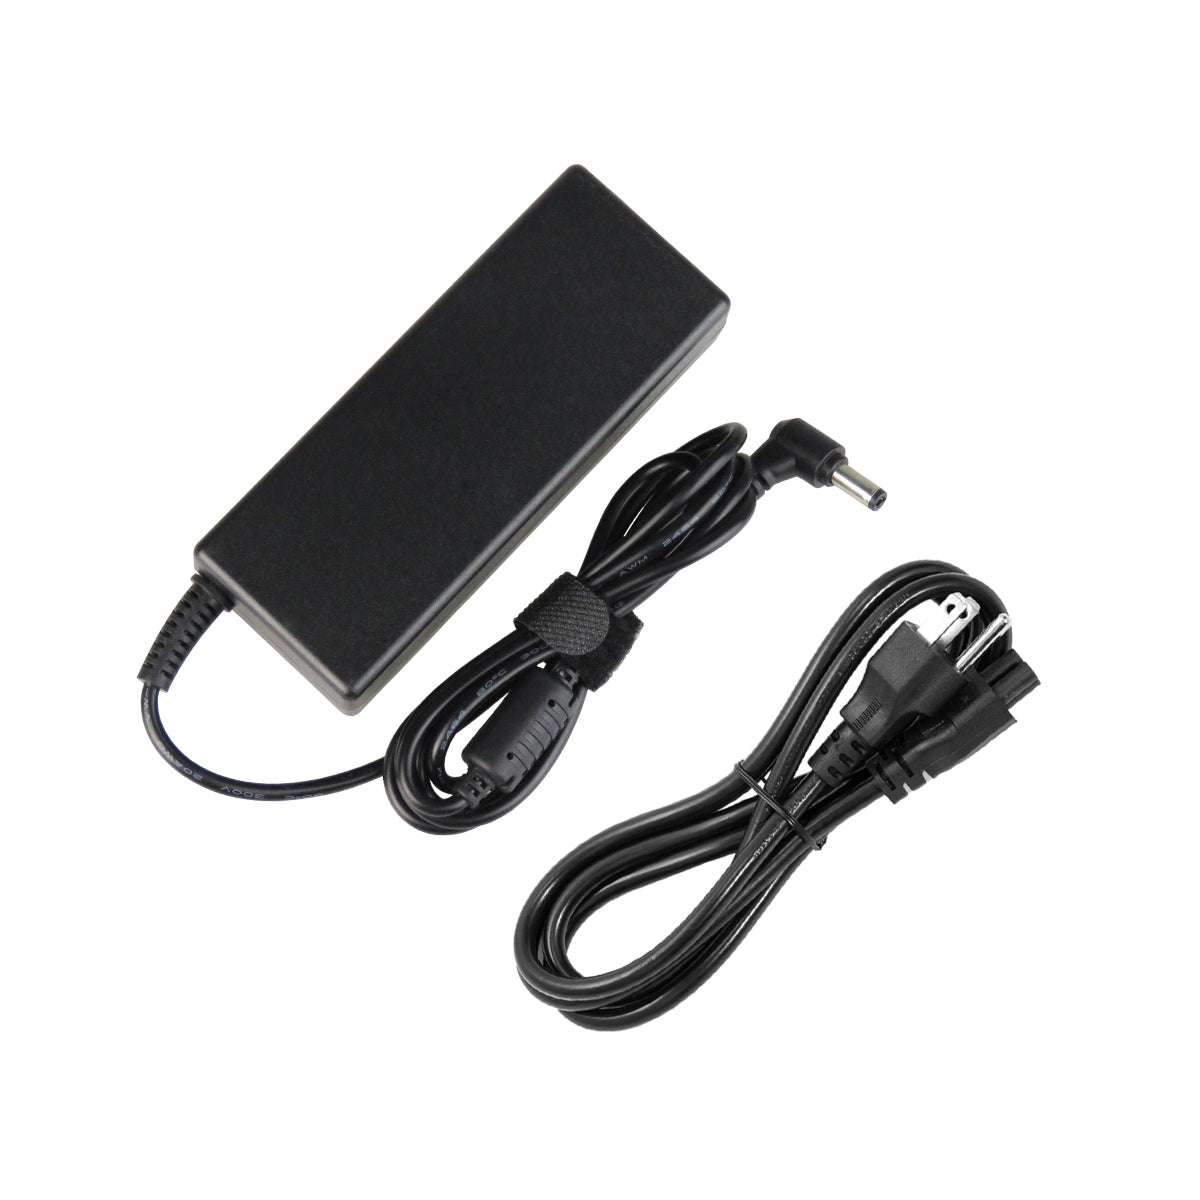 AC Adapter Charger for Toshiba Satellite C850 Notebook.